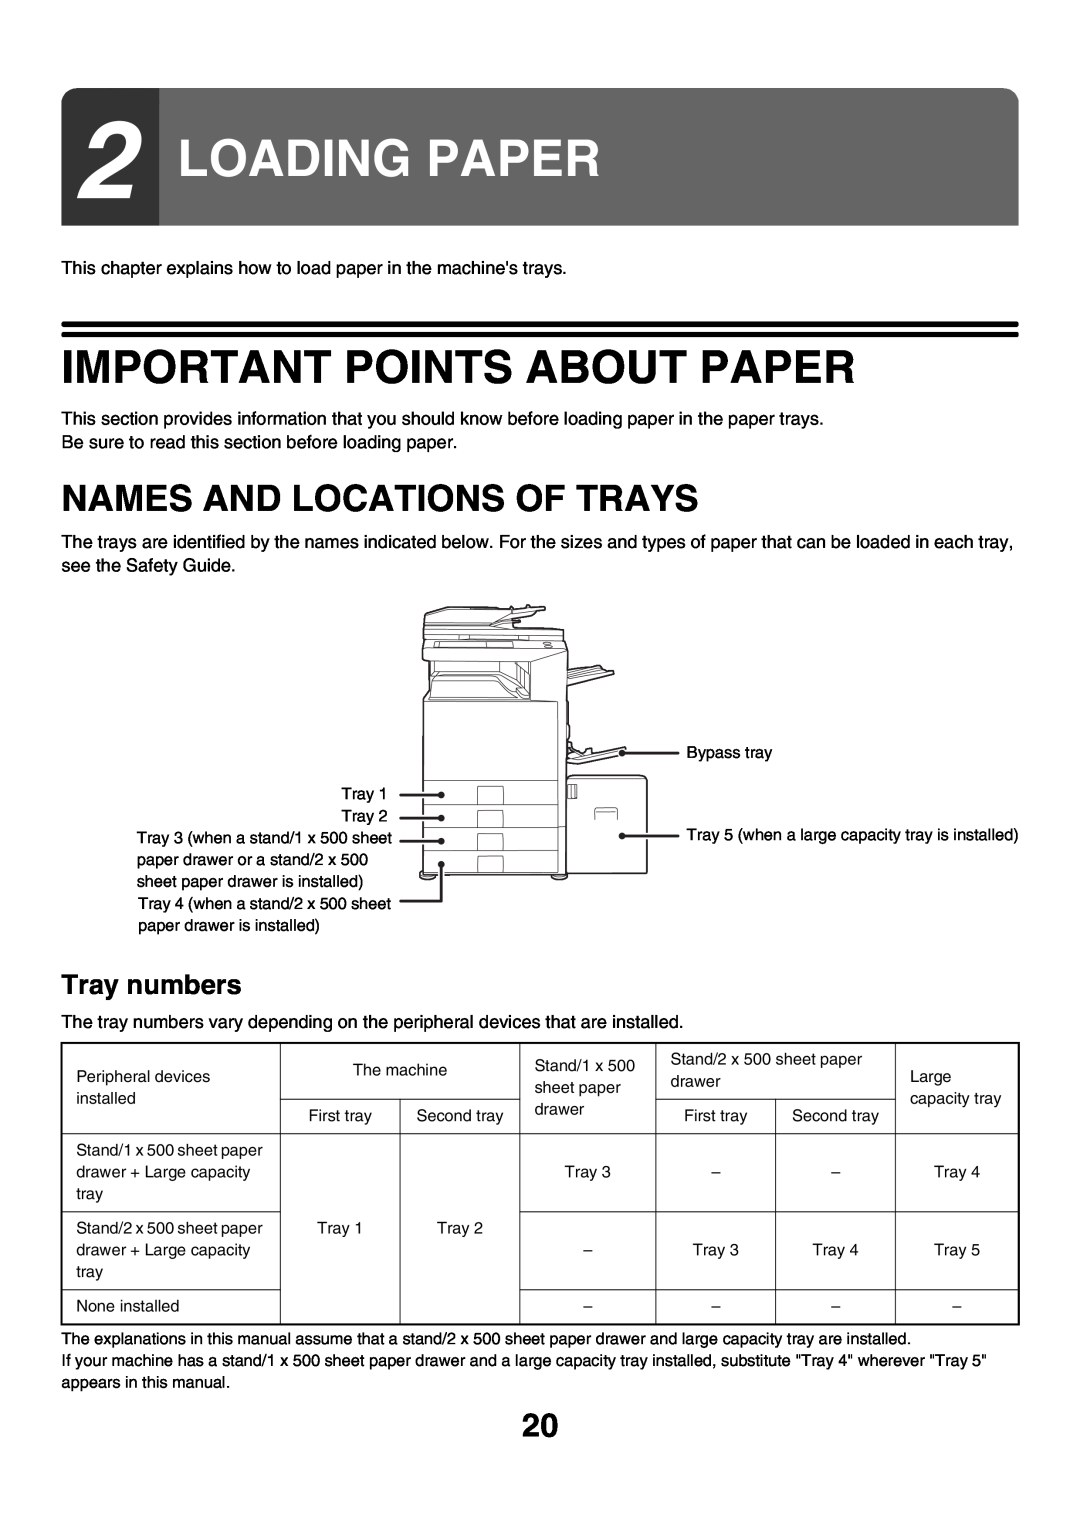 Sharp MX-2700G, MX-2300G manual Loading Paper, Important Points About Paper, Names And Locations Of Trays, Tray numbers 